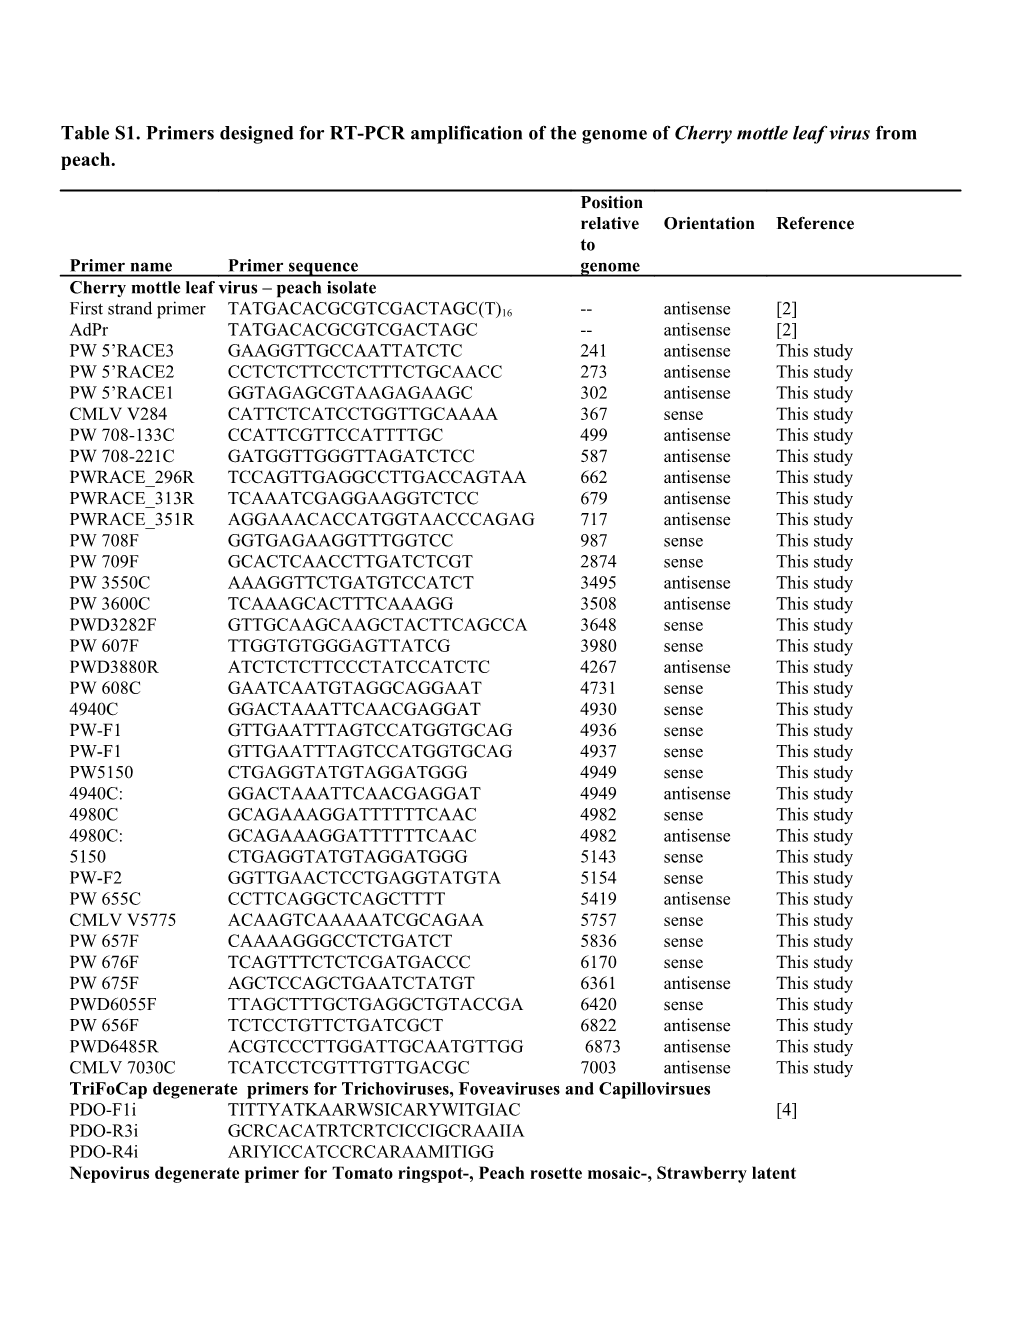 Whole Genome Sequences of a Plum Isolate Virus with Genome Properties Exceedingly Analogous